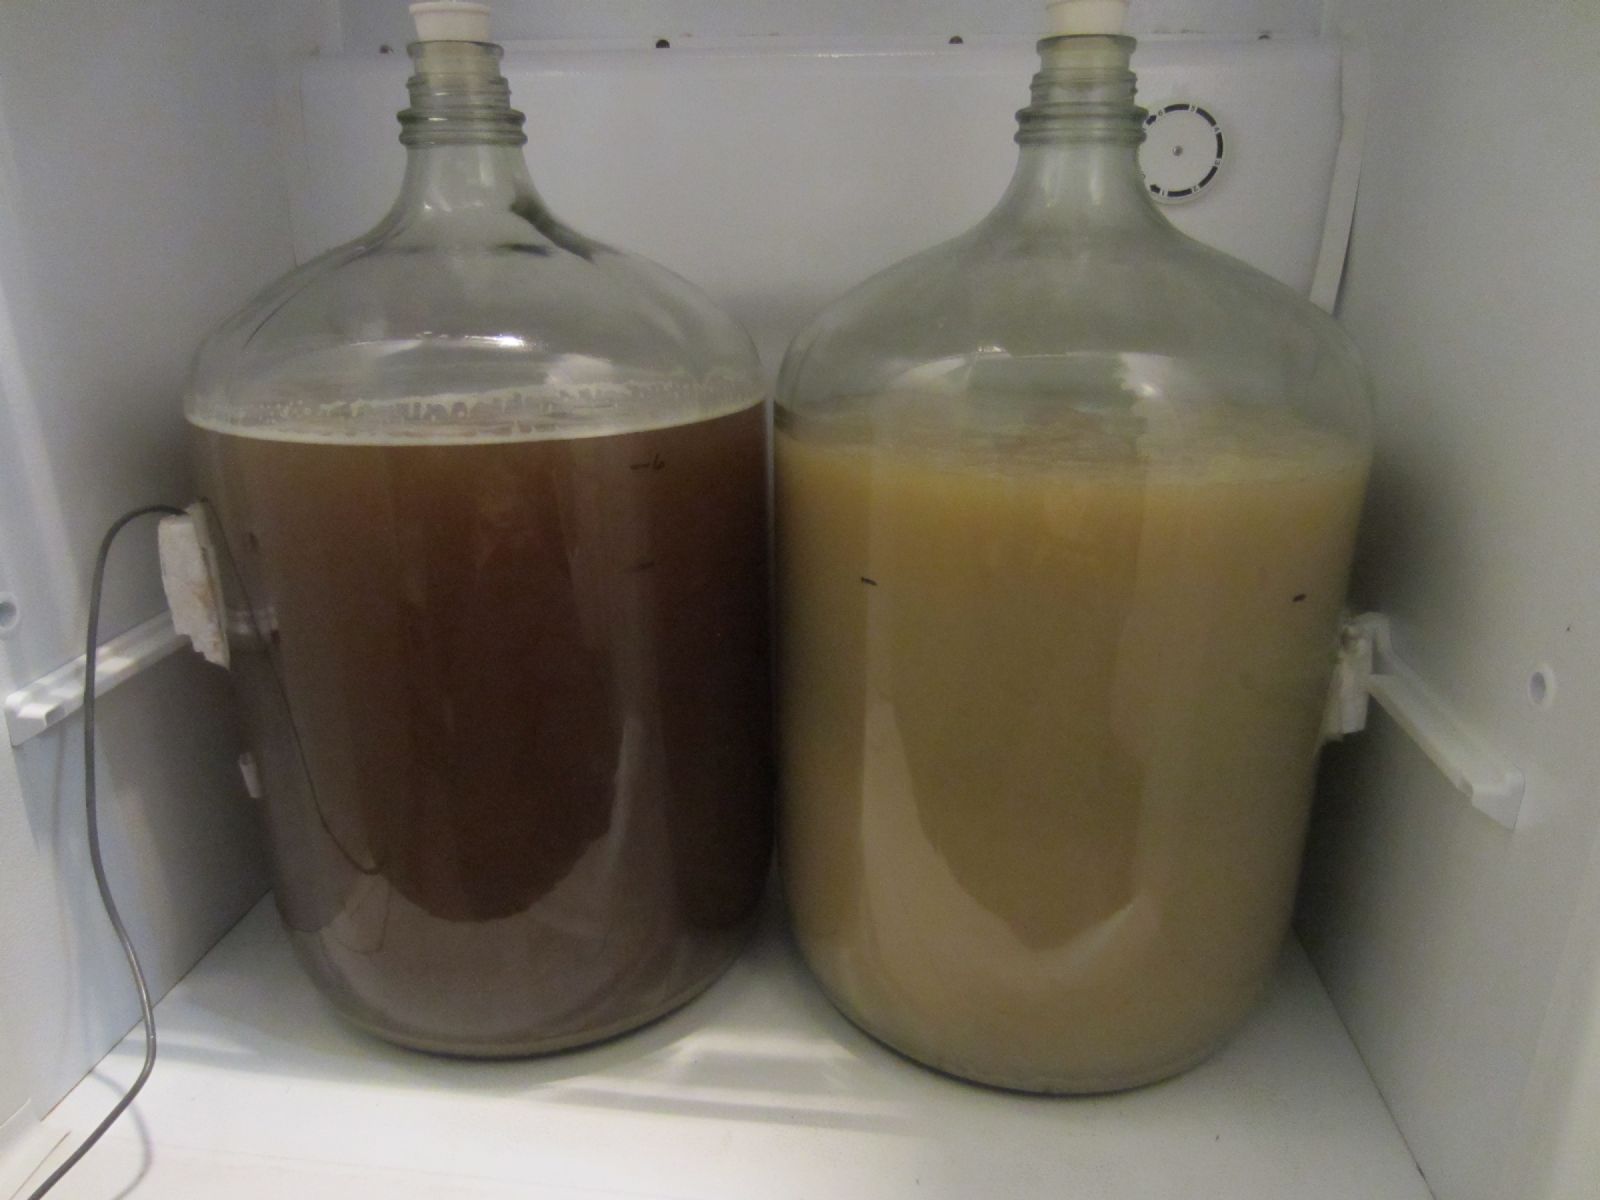 Clarified Wort Before and After